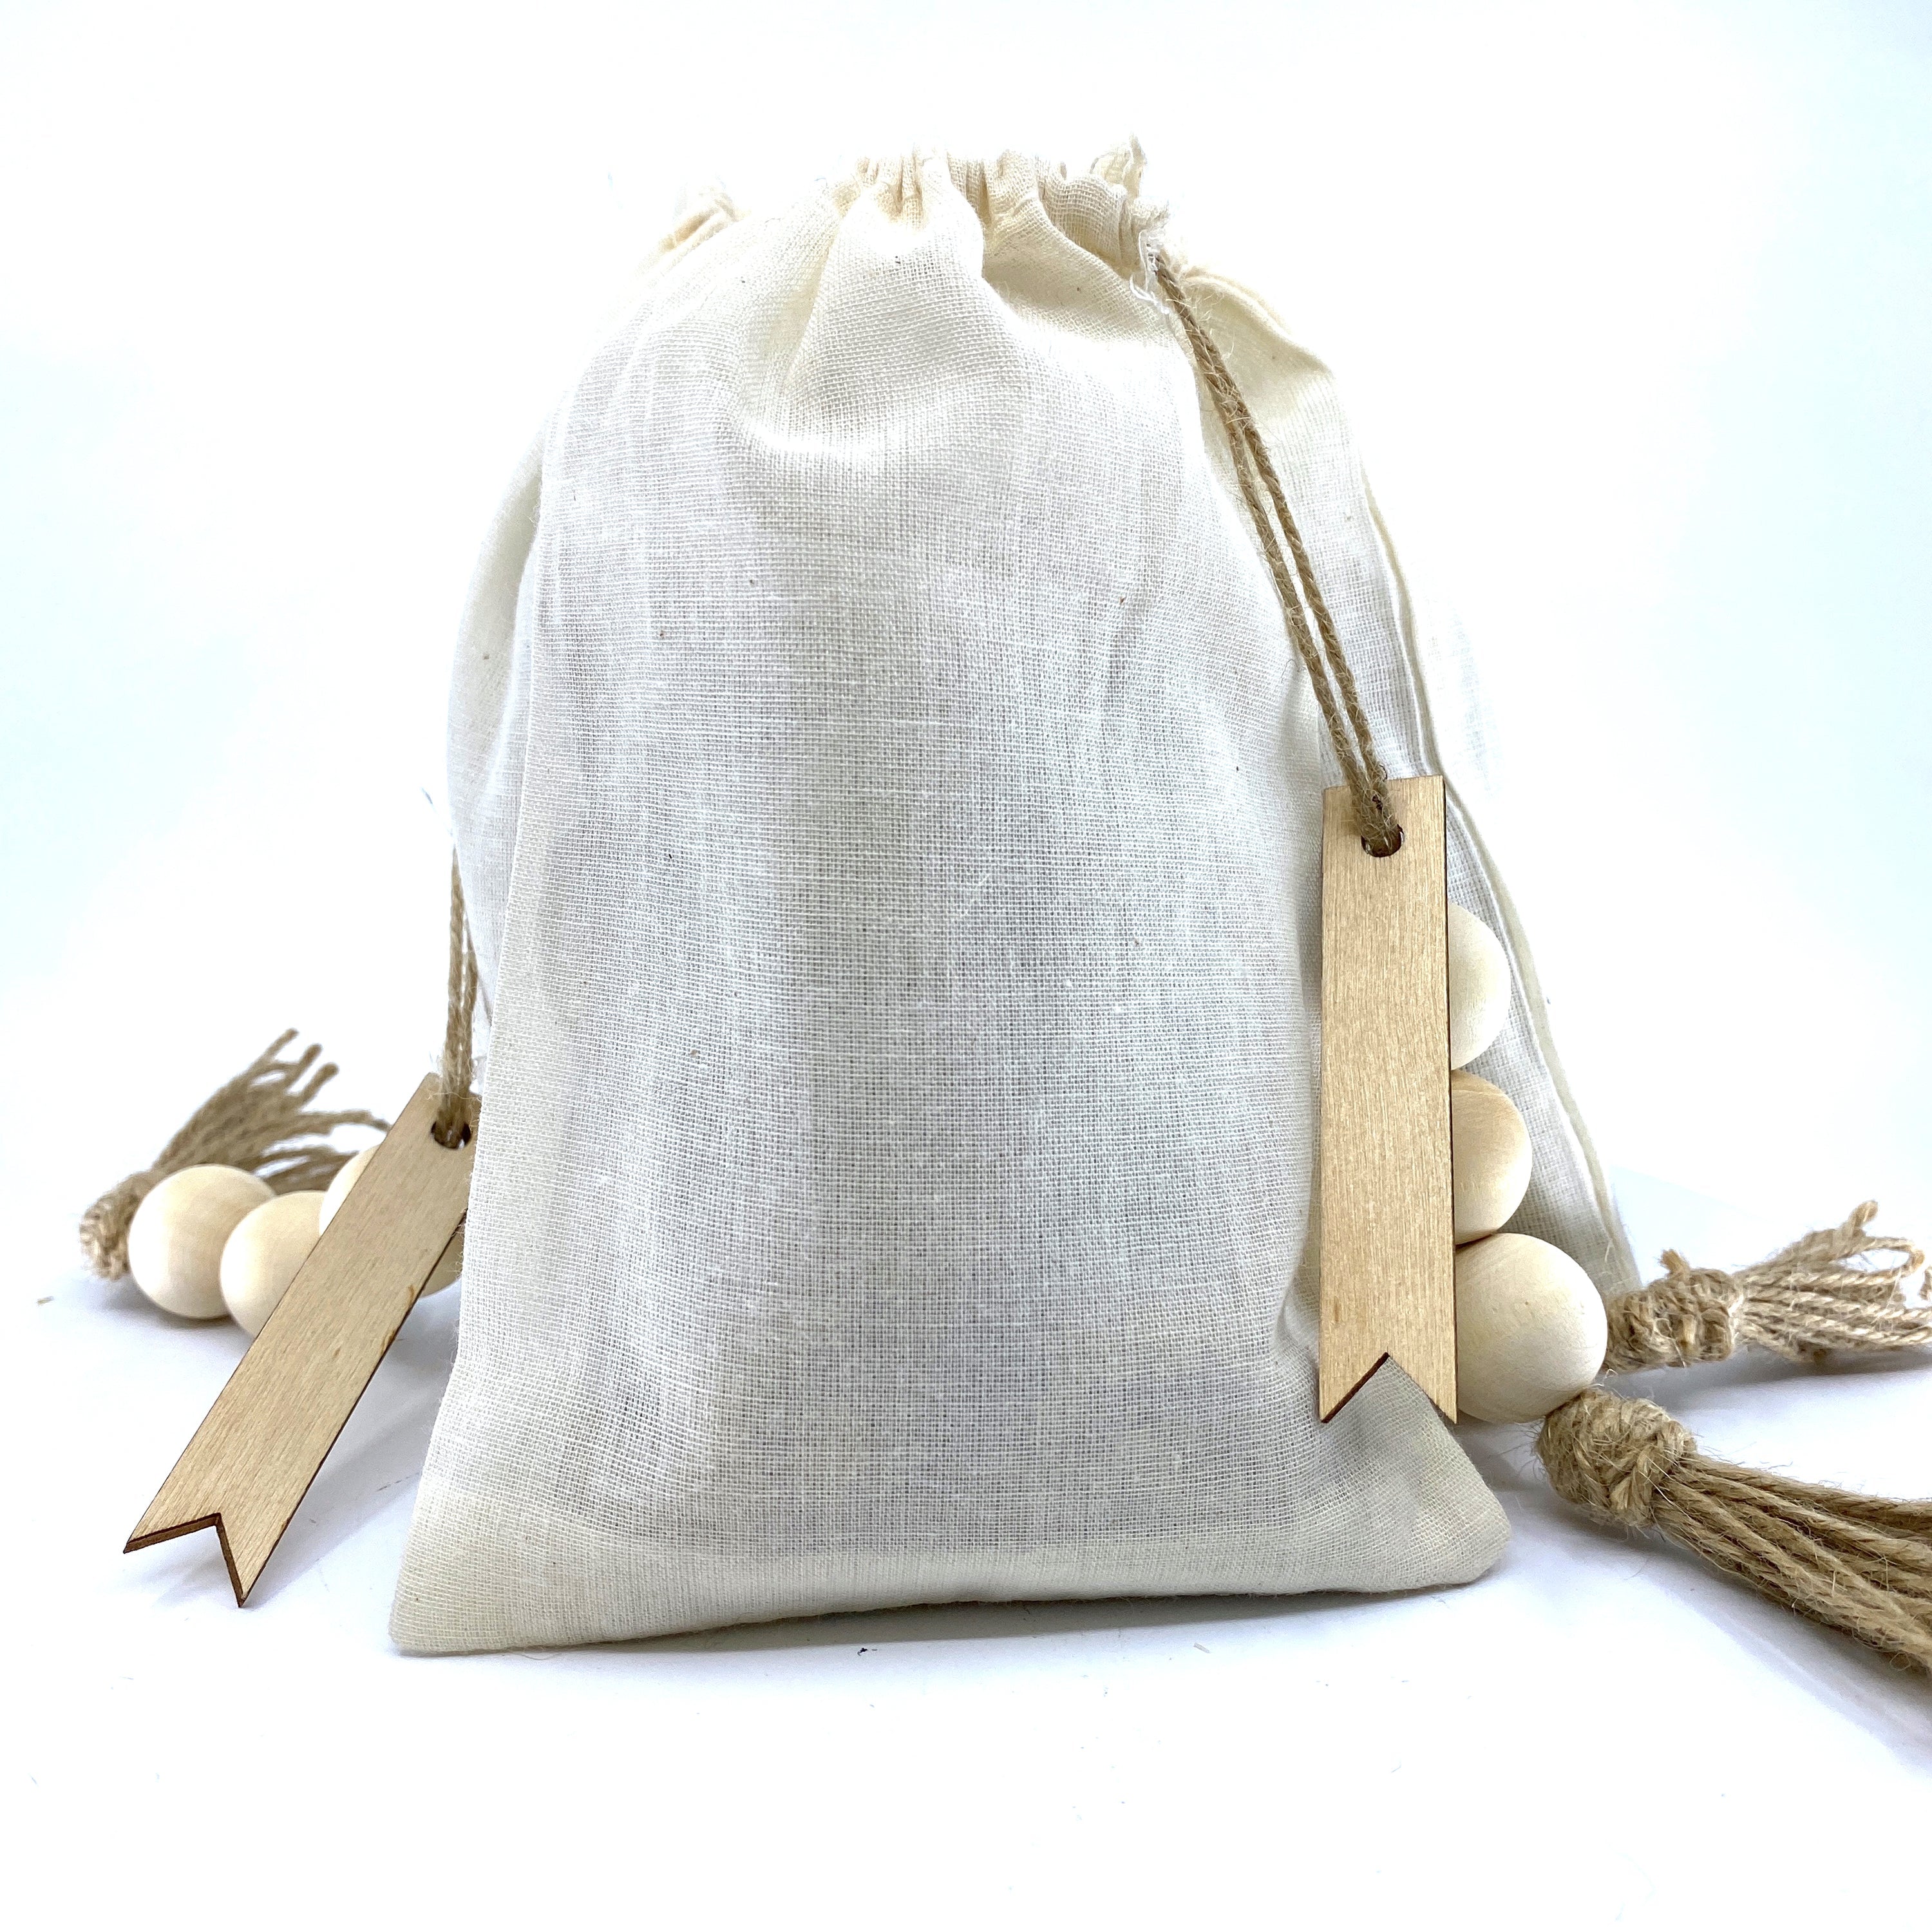 100% Naturally Dried Lavender Flowers, Jute & Wooden Beaded Drawstring